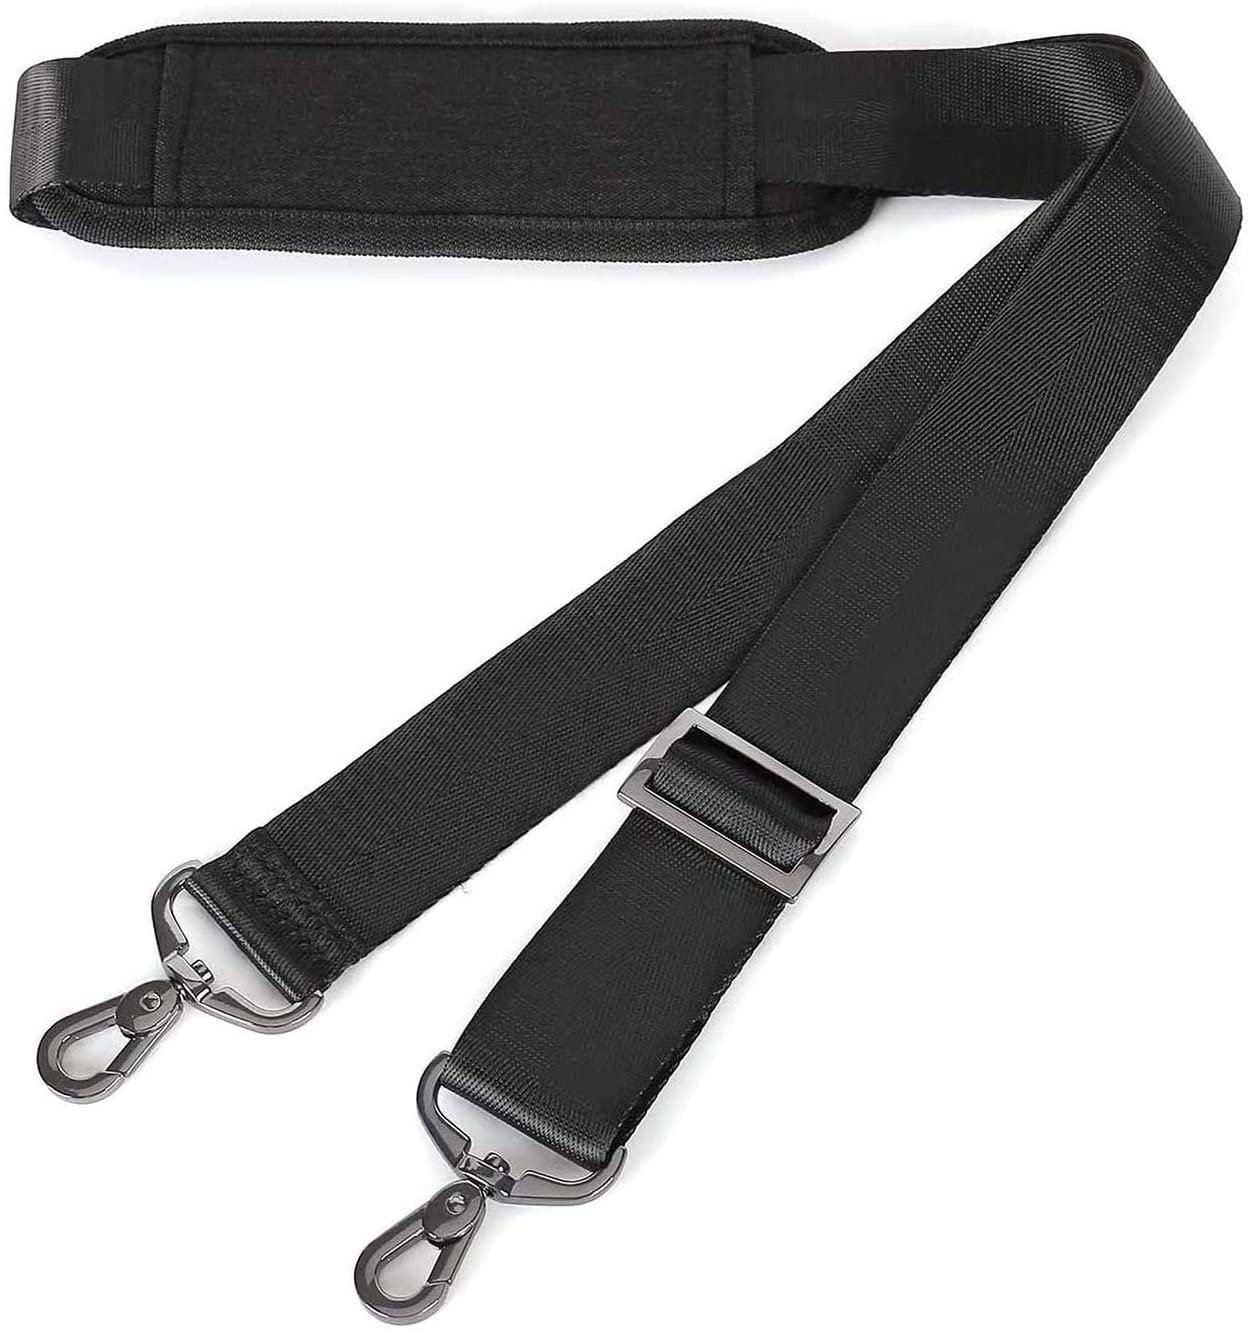 56 inch Shoulder Strap, Adjustable Thick Soft Universal Replacement Non-Slip Fit